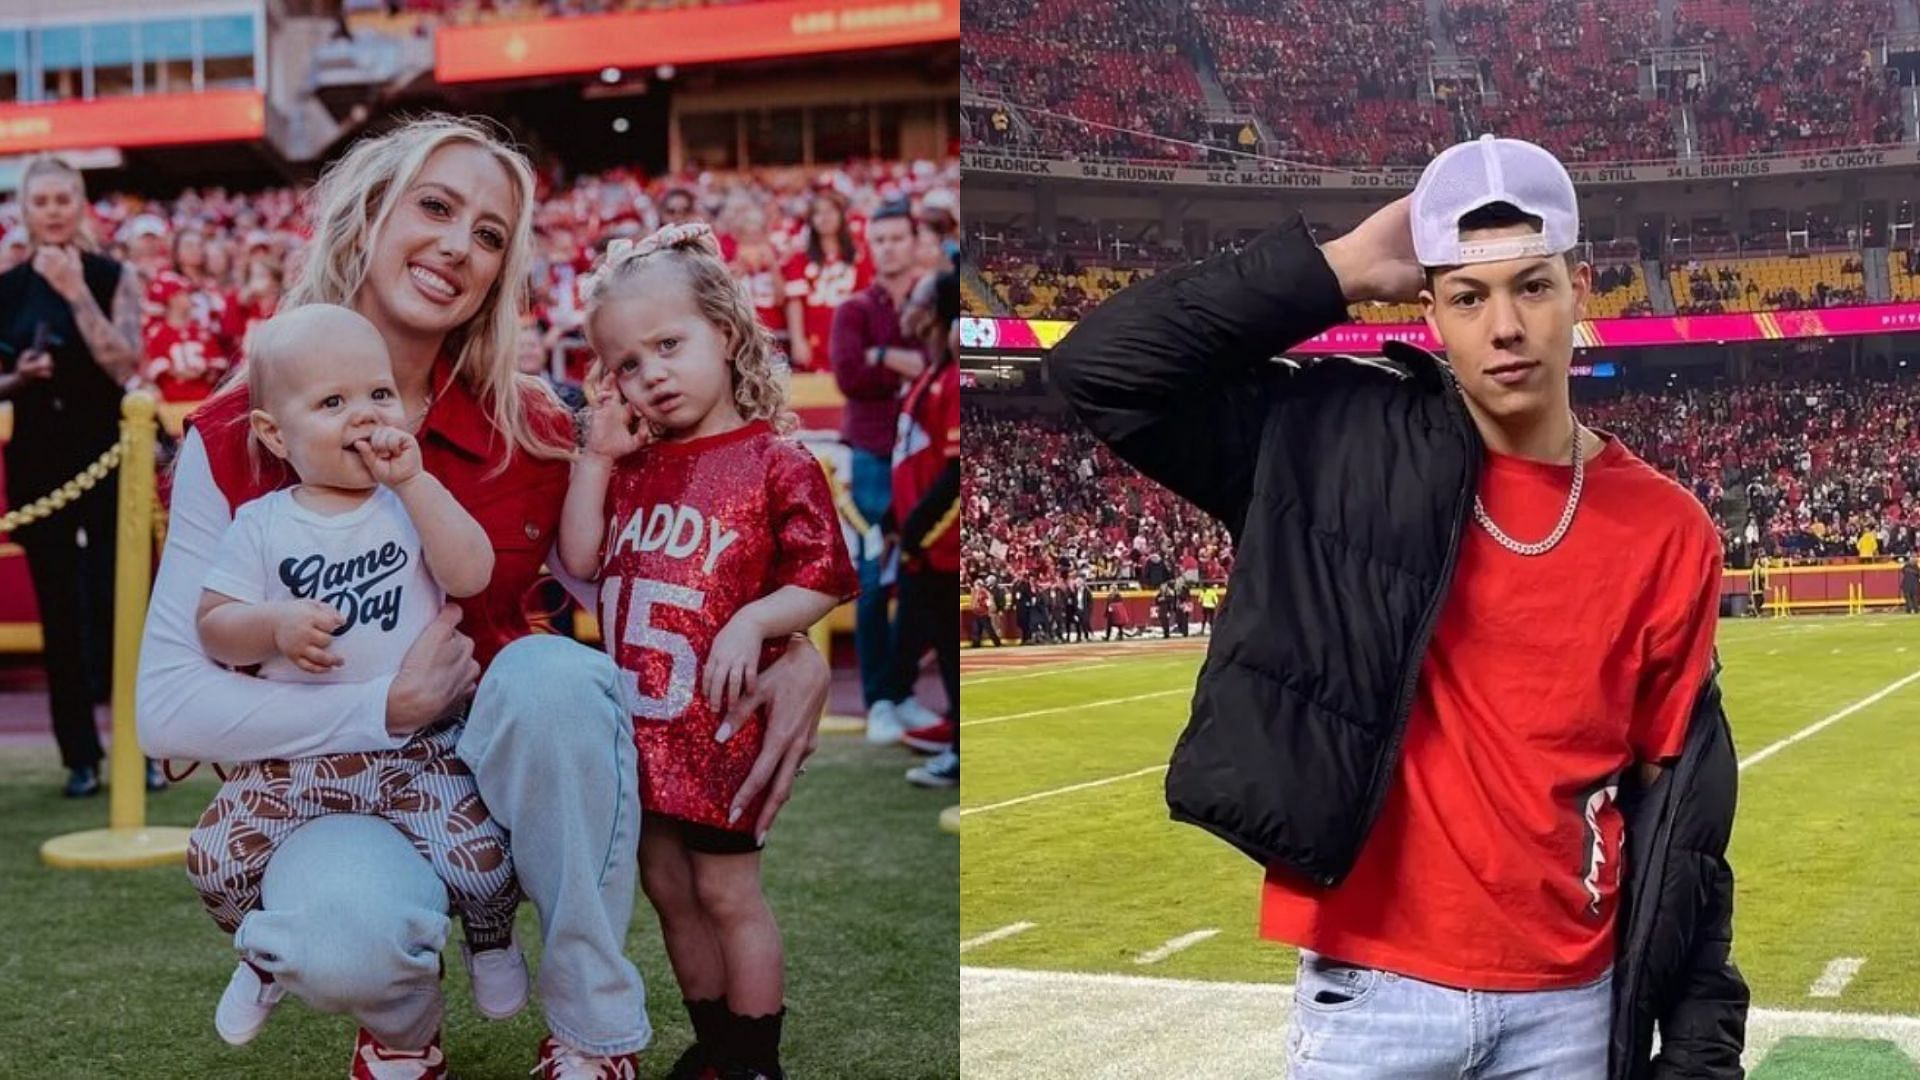 Jackson Mahomes leaves positive comment under Brittany Mahomes game day photos.